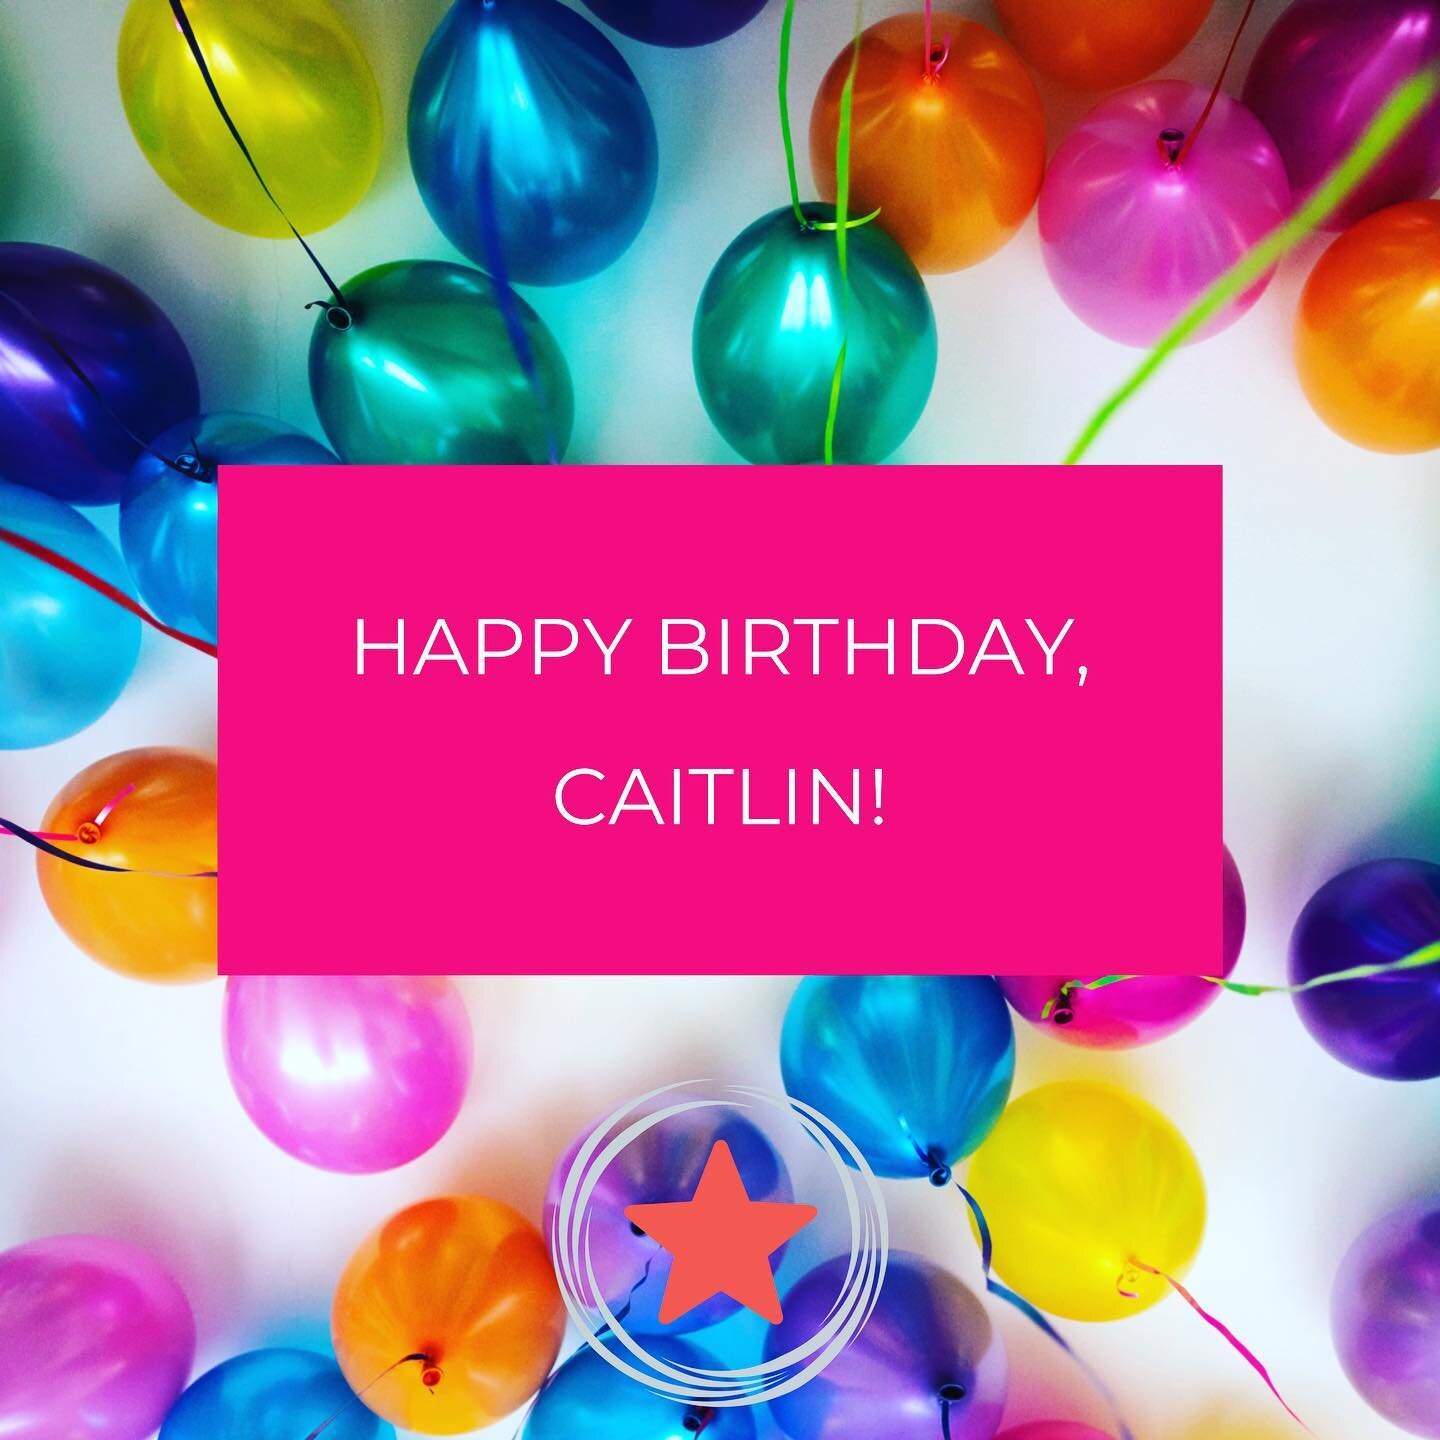 Wishing CLUB instructor @caitlinryanchisholm a happy birthday today! 

Join her Monday nights and Tuesday mornings for stellar workouts!